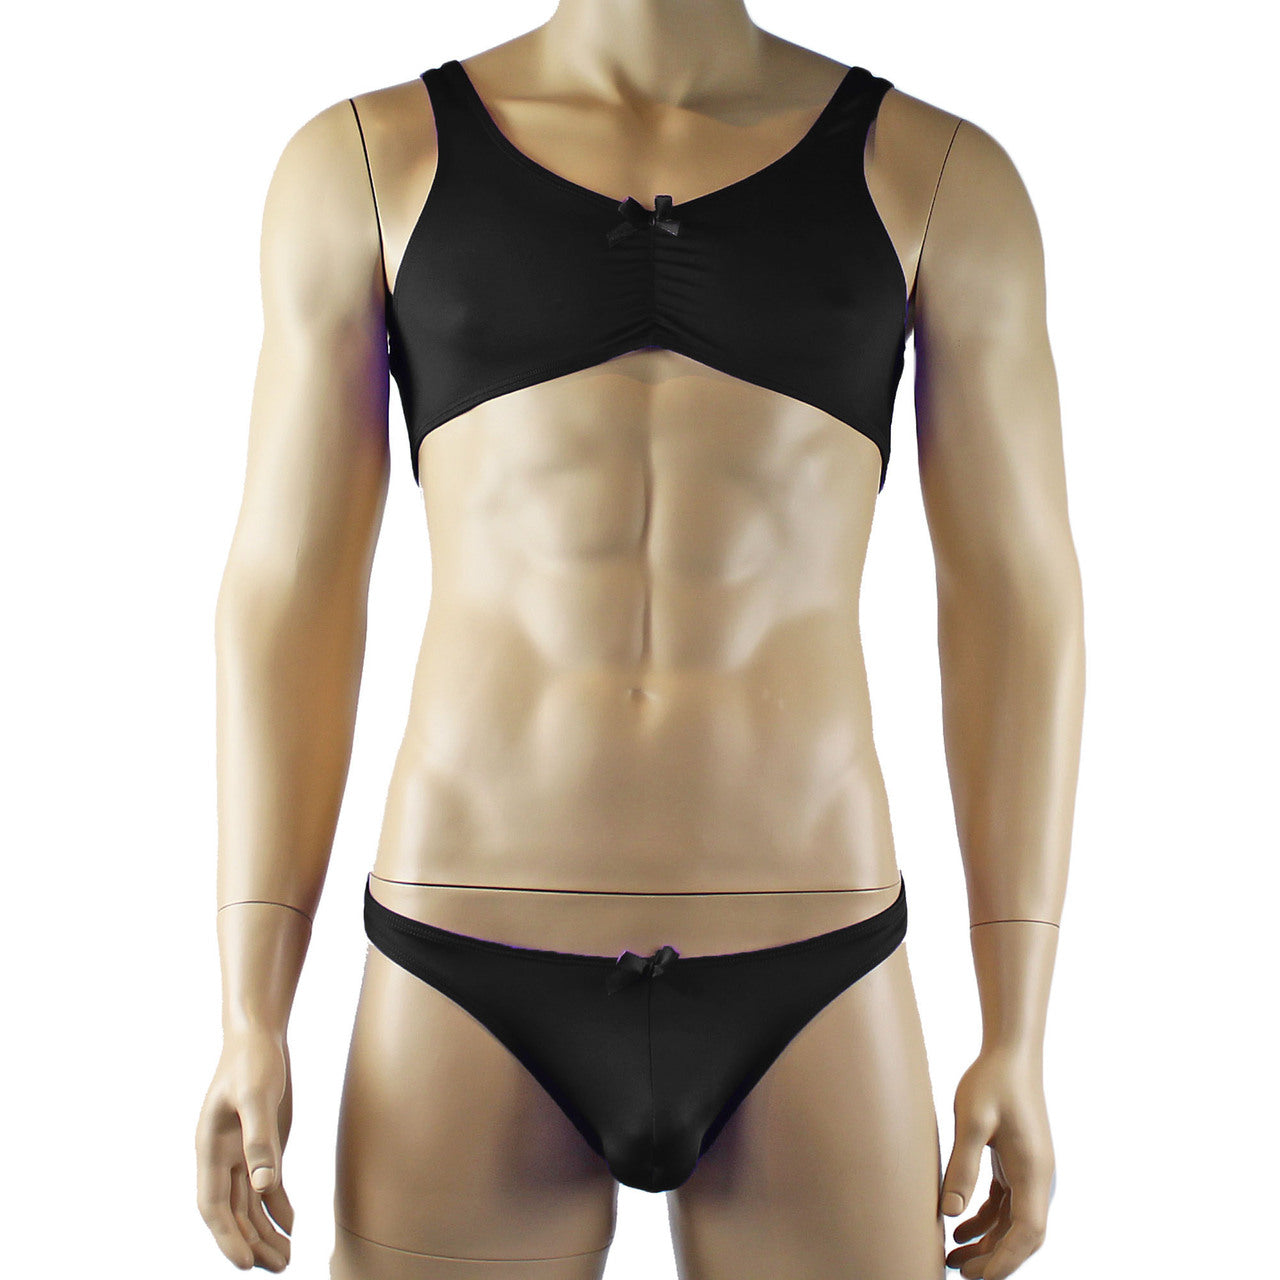 Male Angel Stretch Spandex Bra Top & Matching Thong with Bow Black